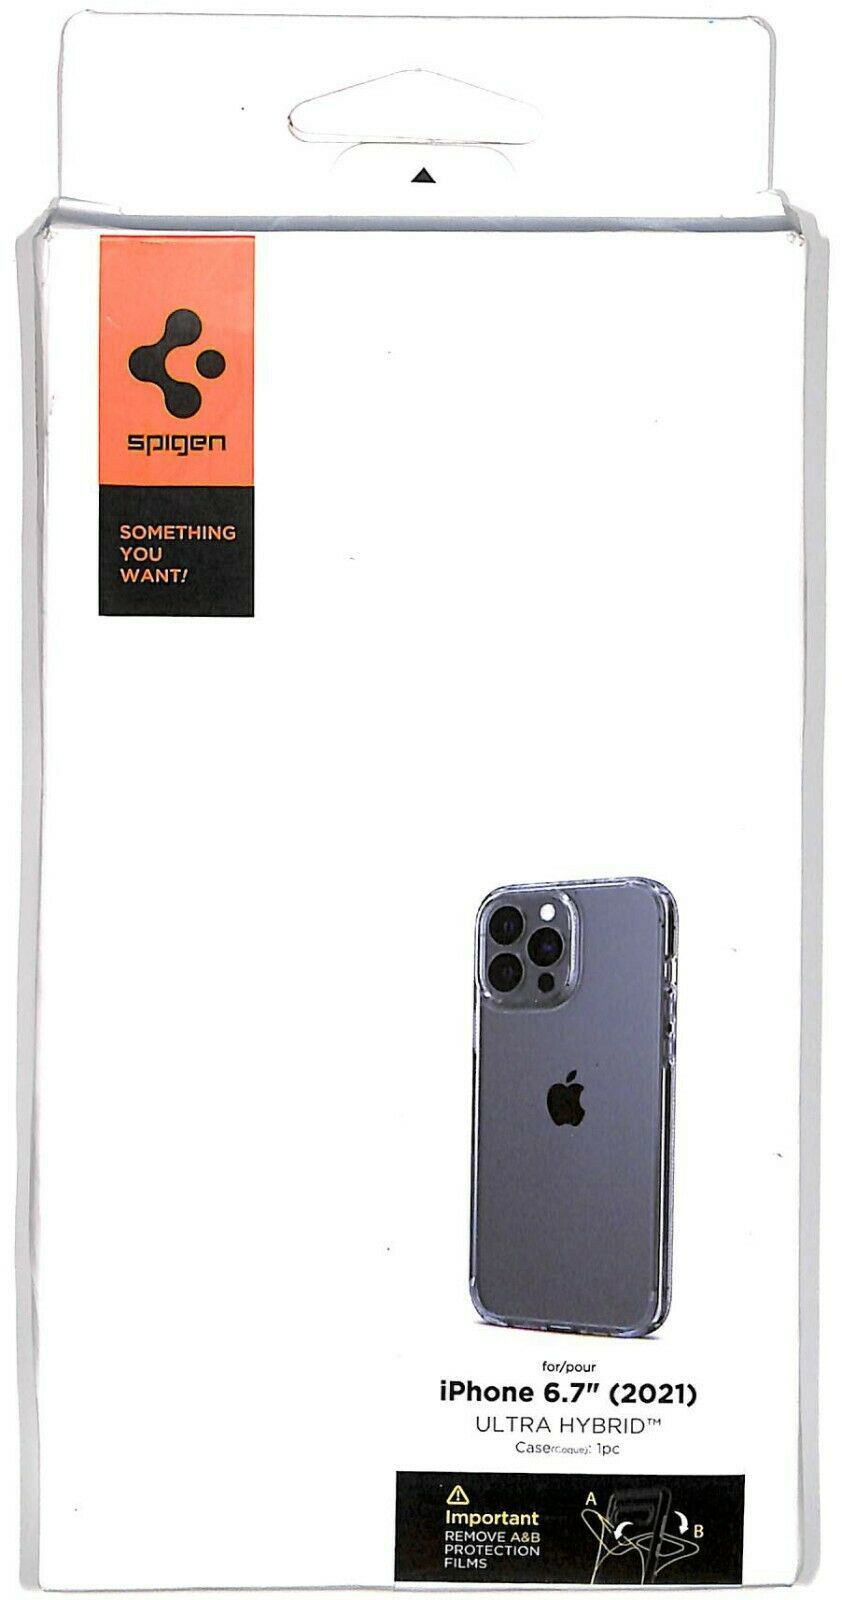 For Apple iPhone 13 Pro Max 6.7" 2021 - Spigen Ultra Hybrid Clear Case New - $10.88